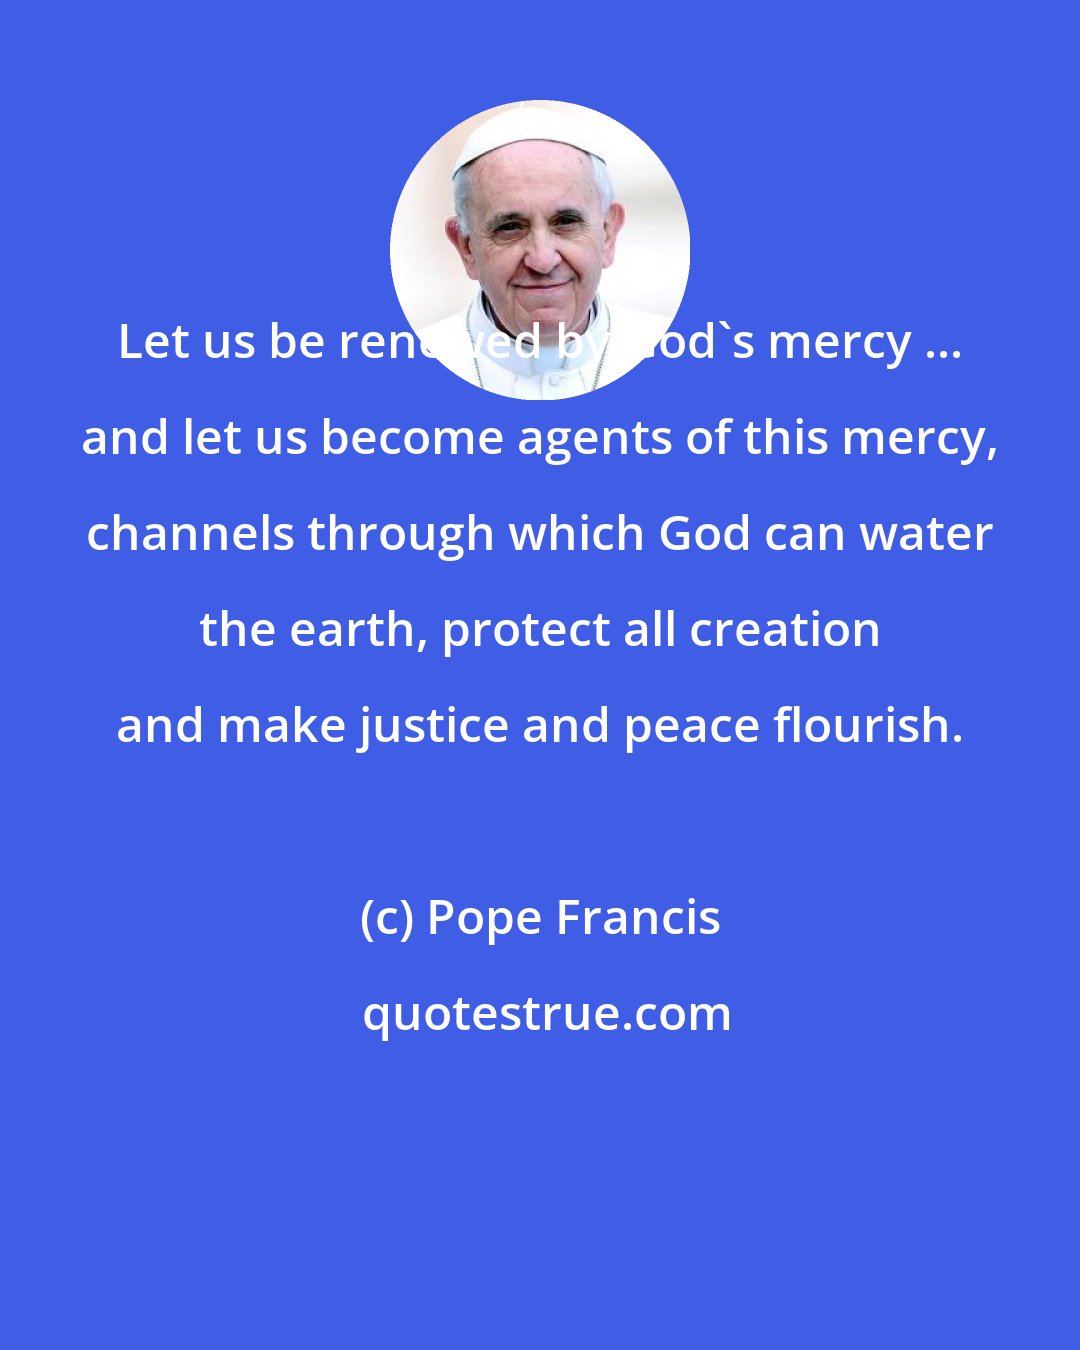 Pope Francis: Let us be renewed by God's mercy ... and let us become agents of this mercy, channels through which God can water the earth, protect all creation and make justice and peace flourish.